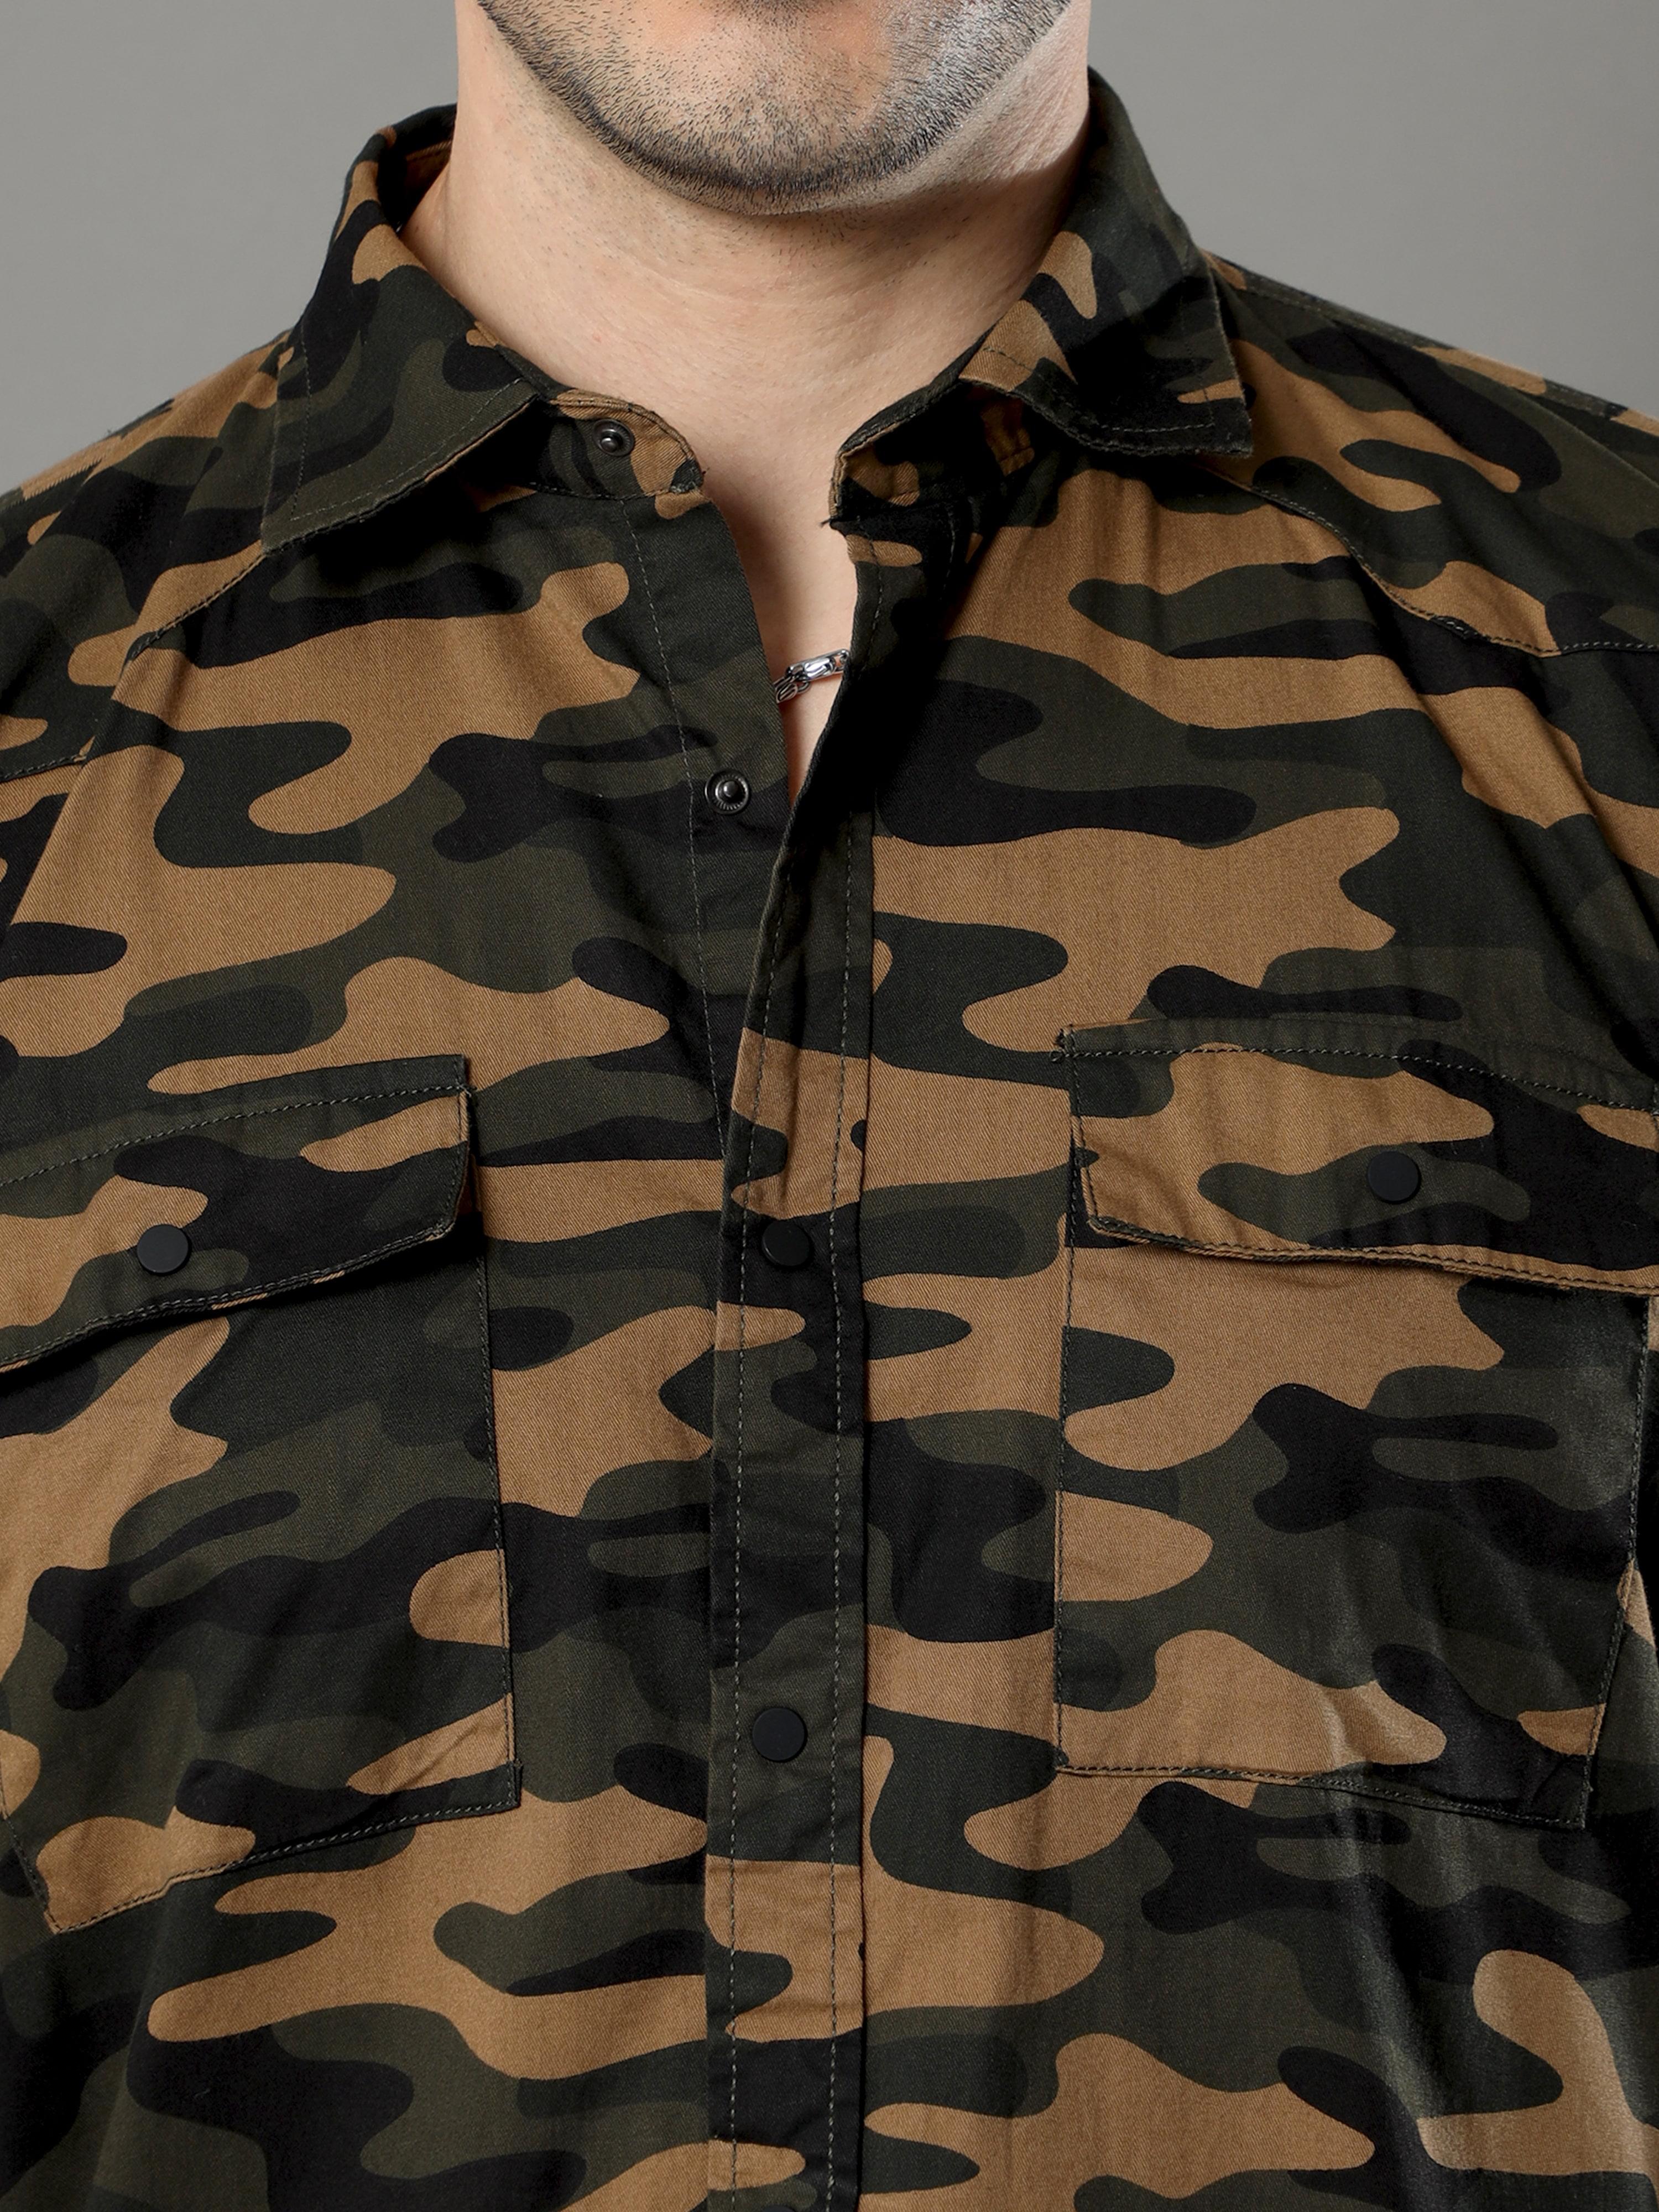 Buy Double Pocket Army Print Shirt Online at MilesKartRs. 1049.00